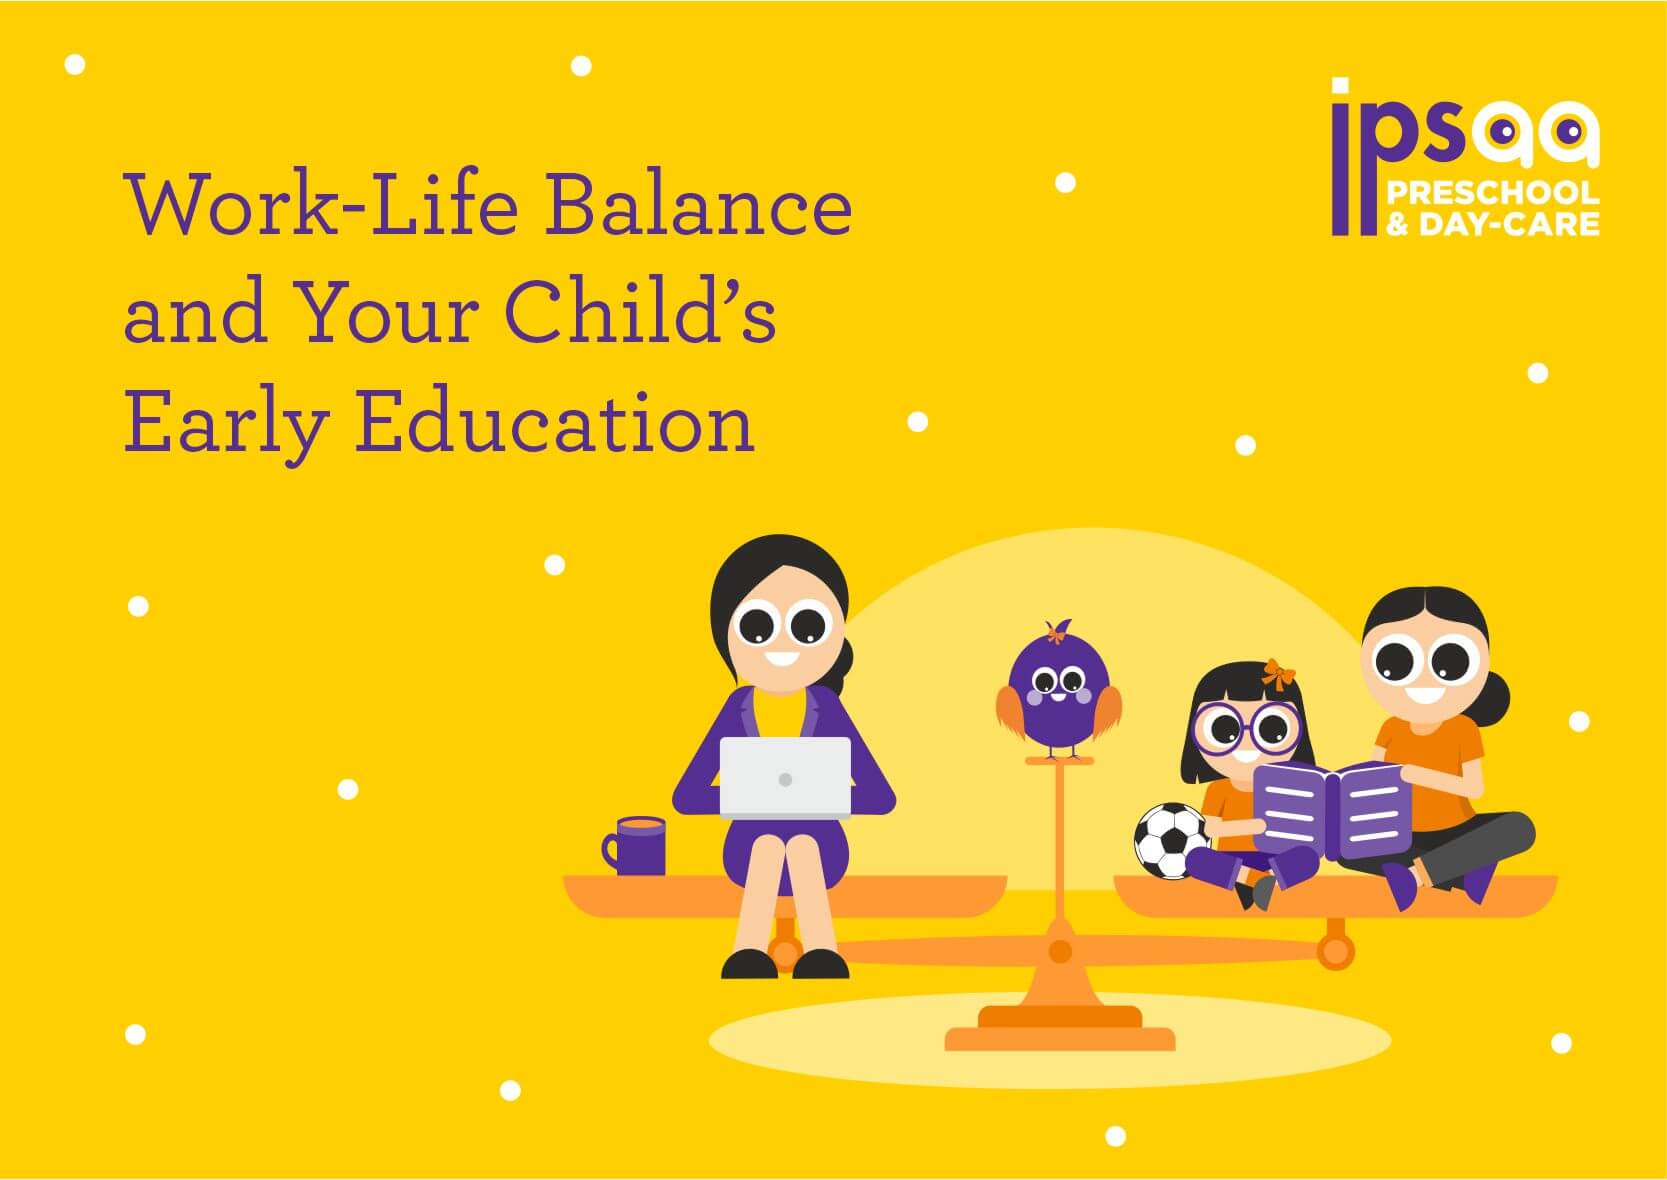 Work-Life Balance and Your Child’s Early Education